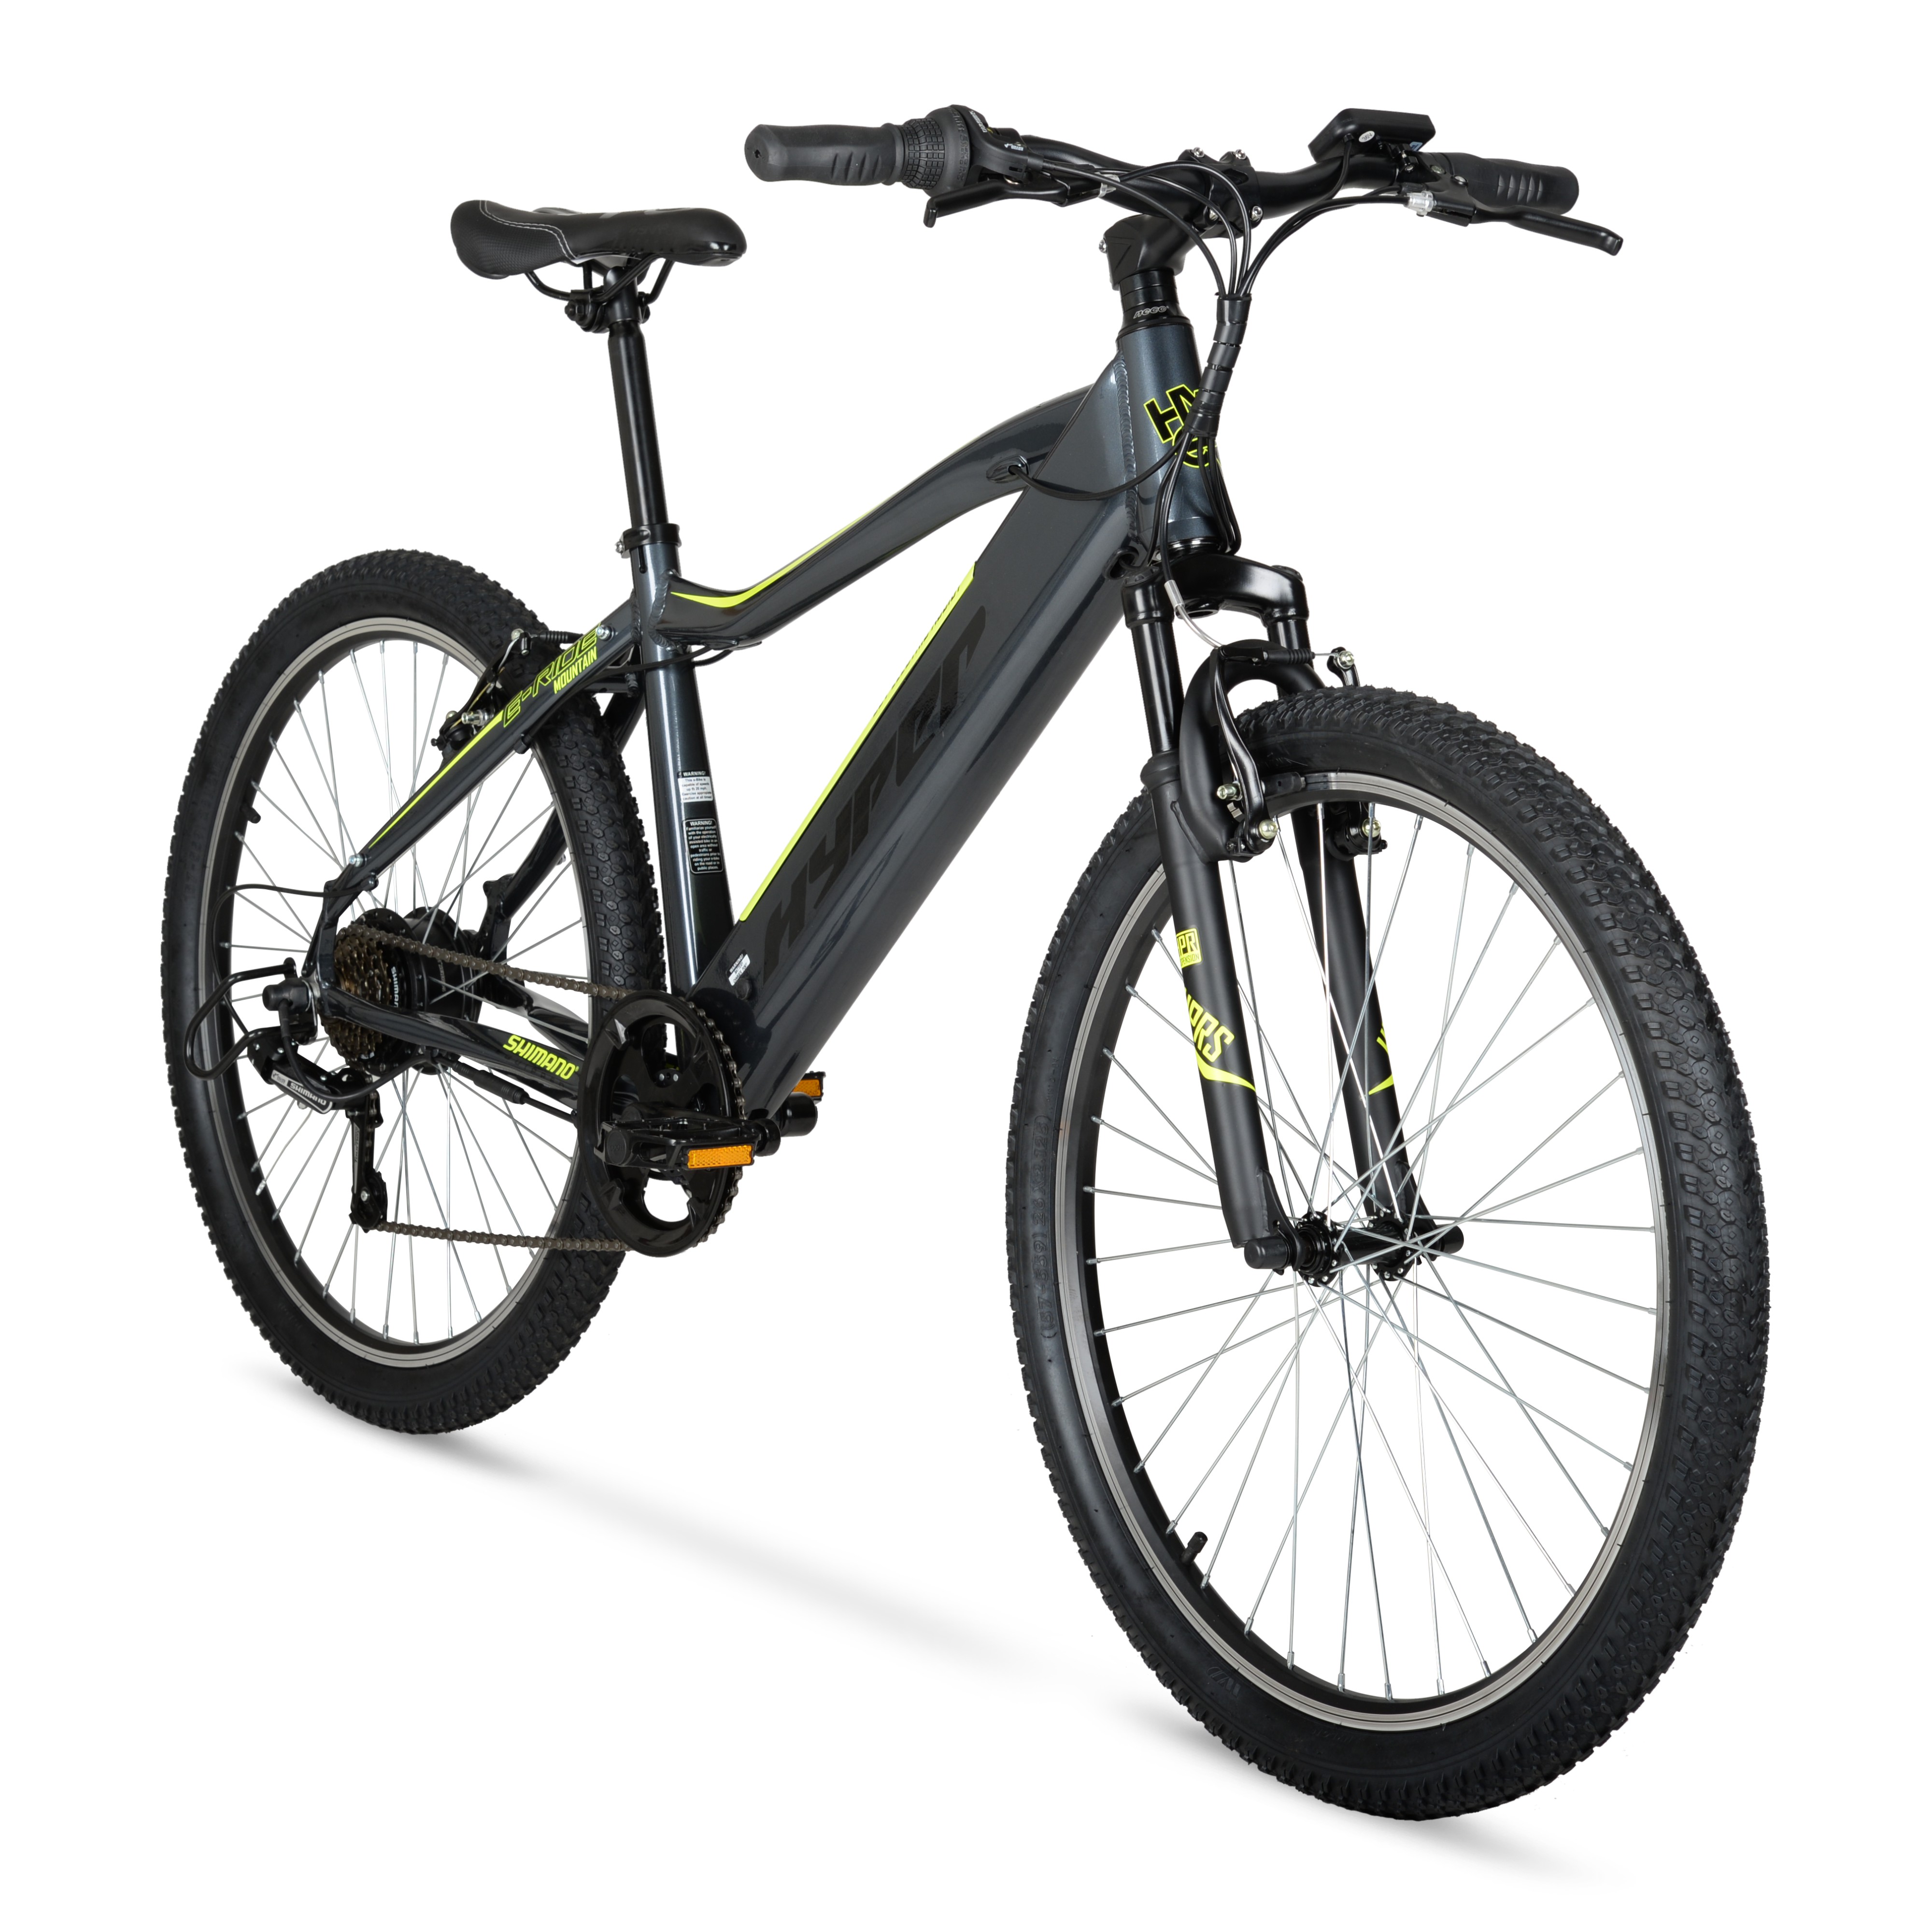 Hyper Bicycles E-Ride Electric Pedal Assist Mountain Bike